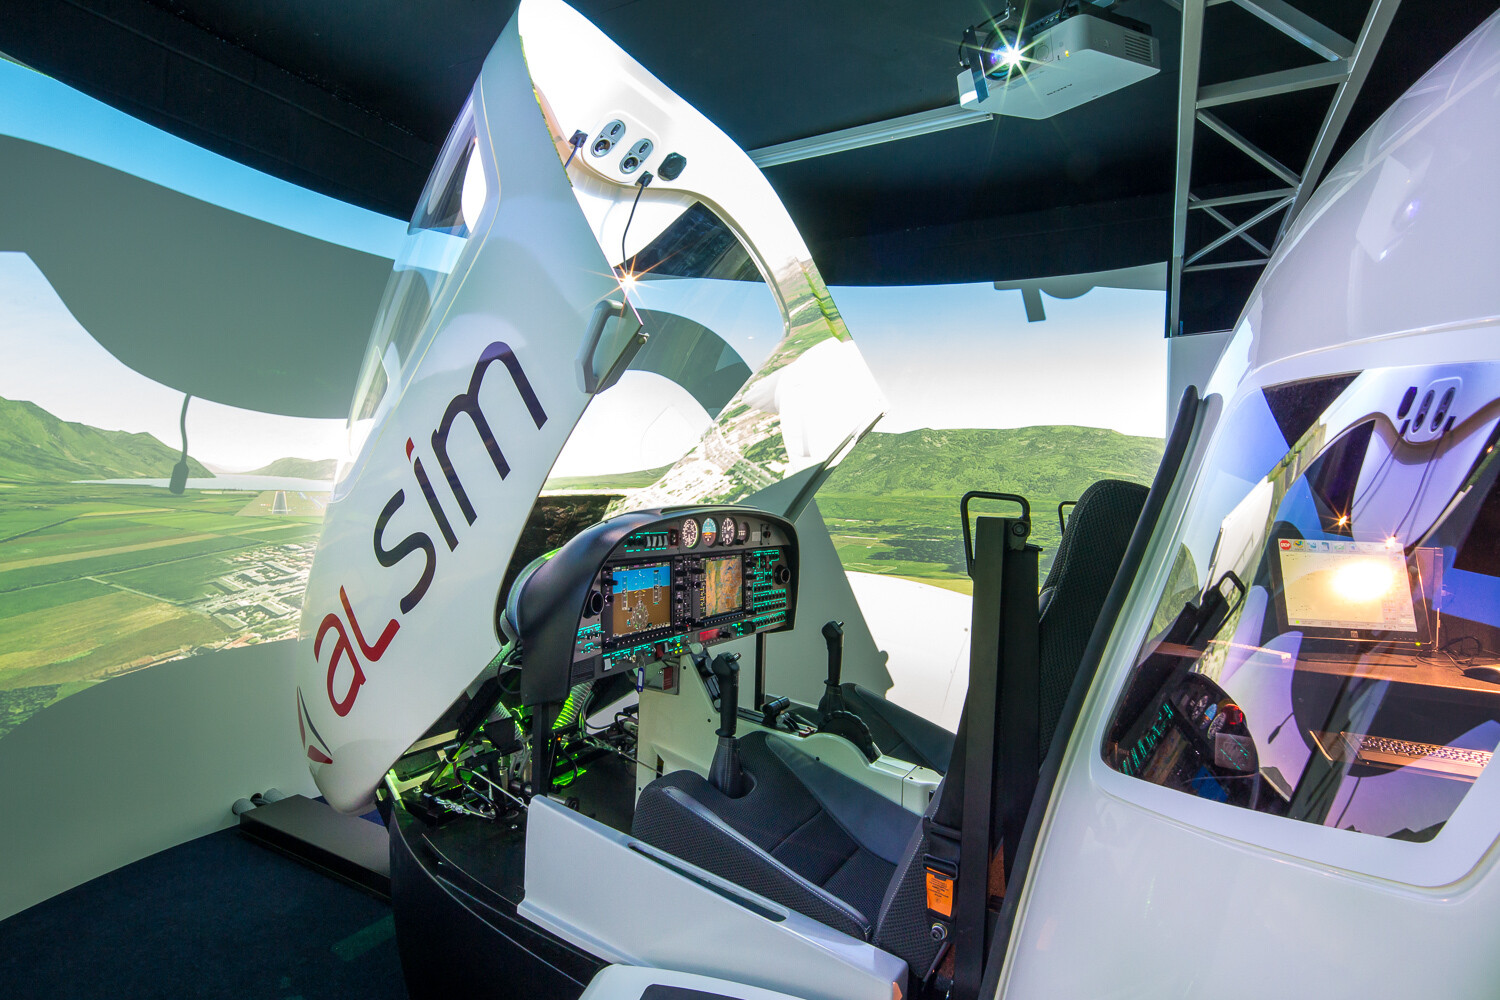 Perth Airport Flight Simulator Experience for Two